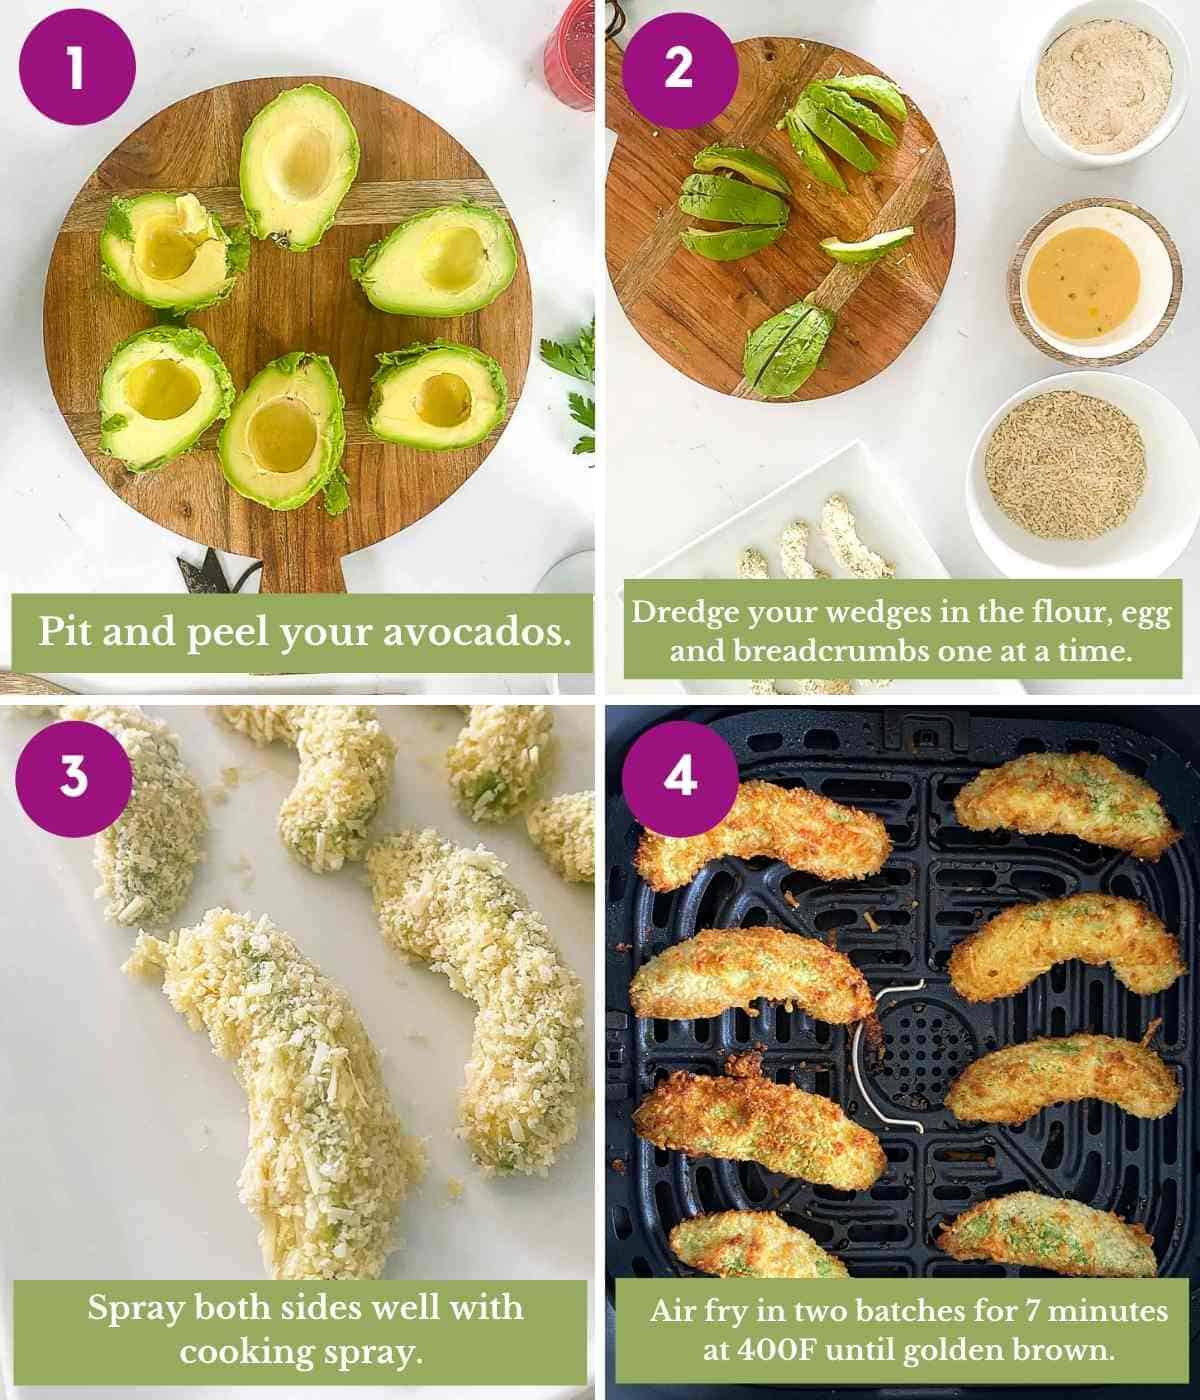 Steps showing how to make avocado fries using an air fryer.